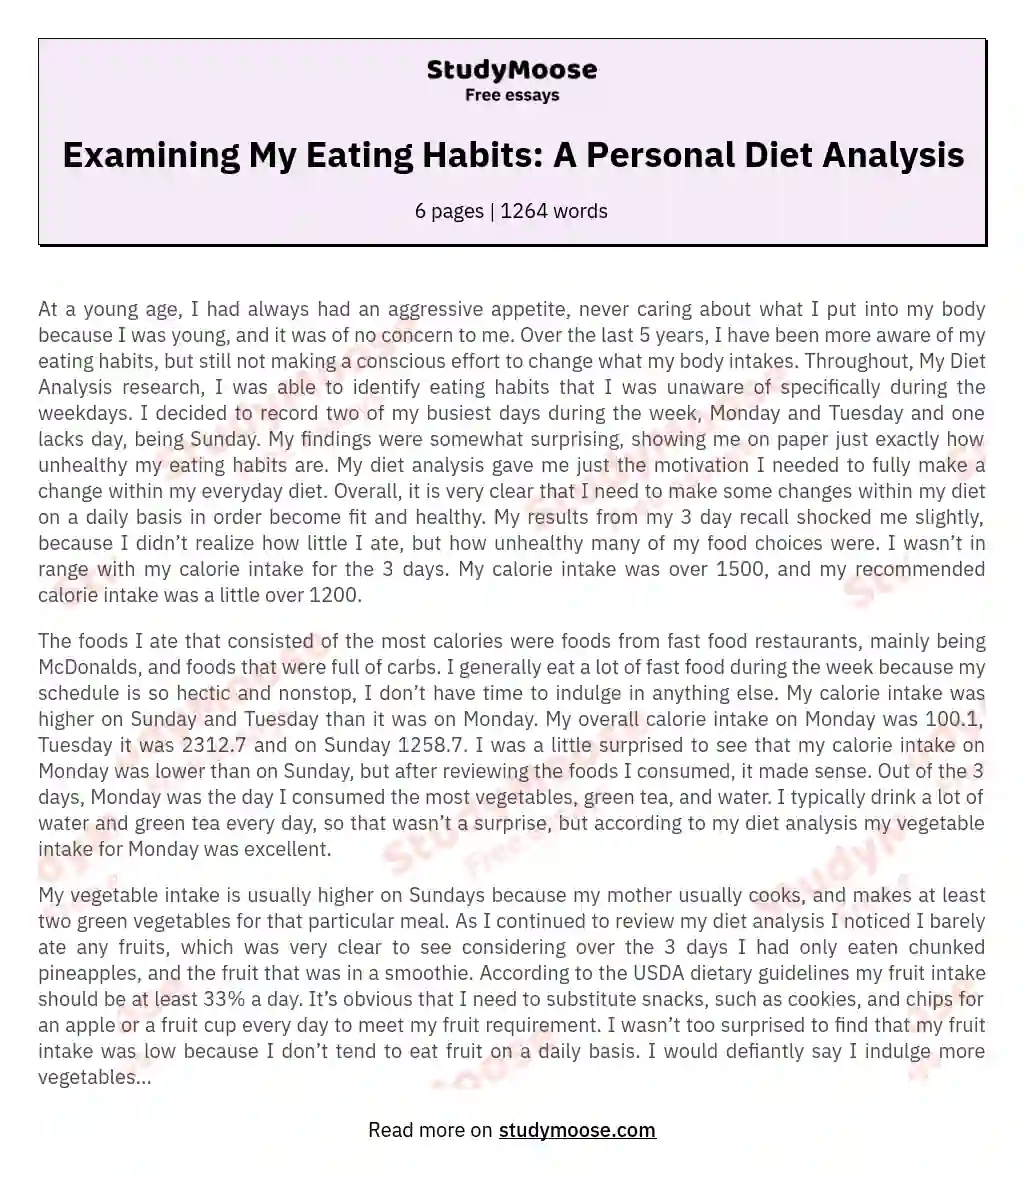 Examining My Eating Habits: A Personal Diet Analysis essay